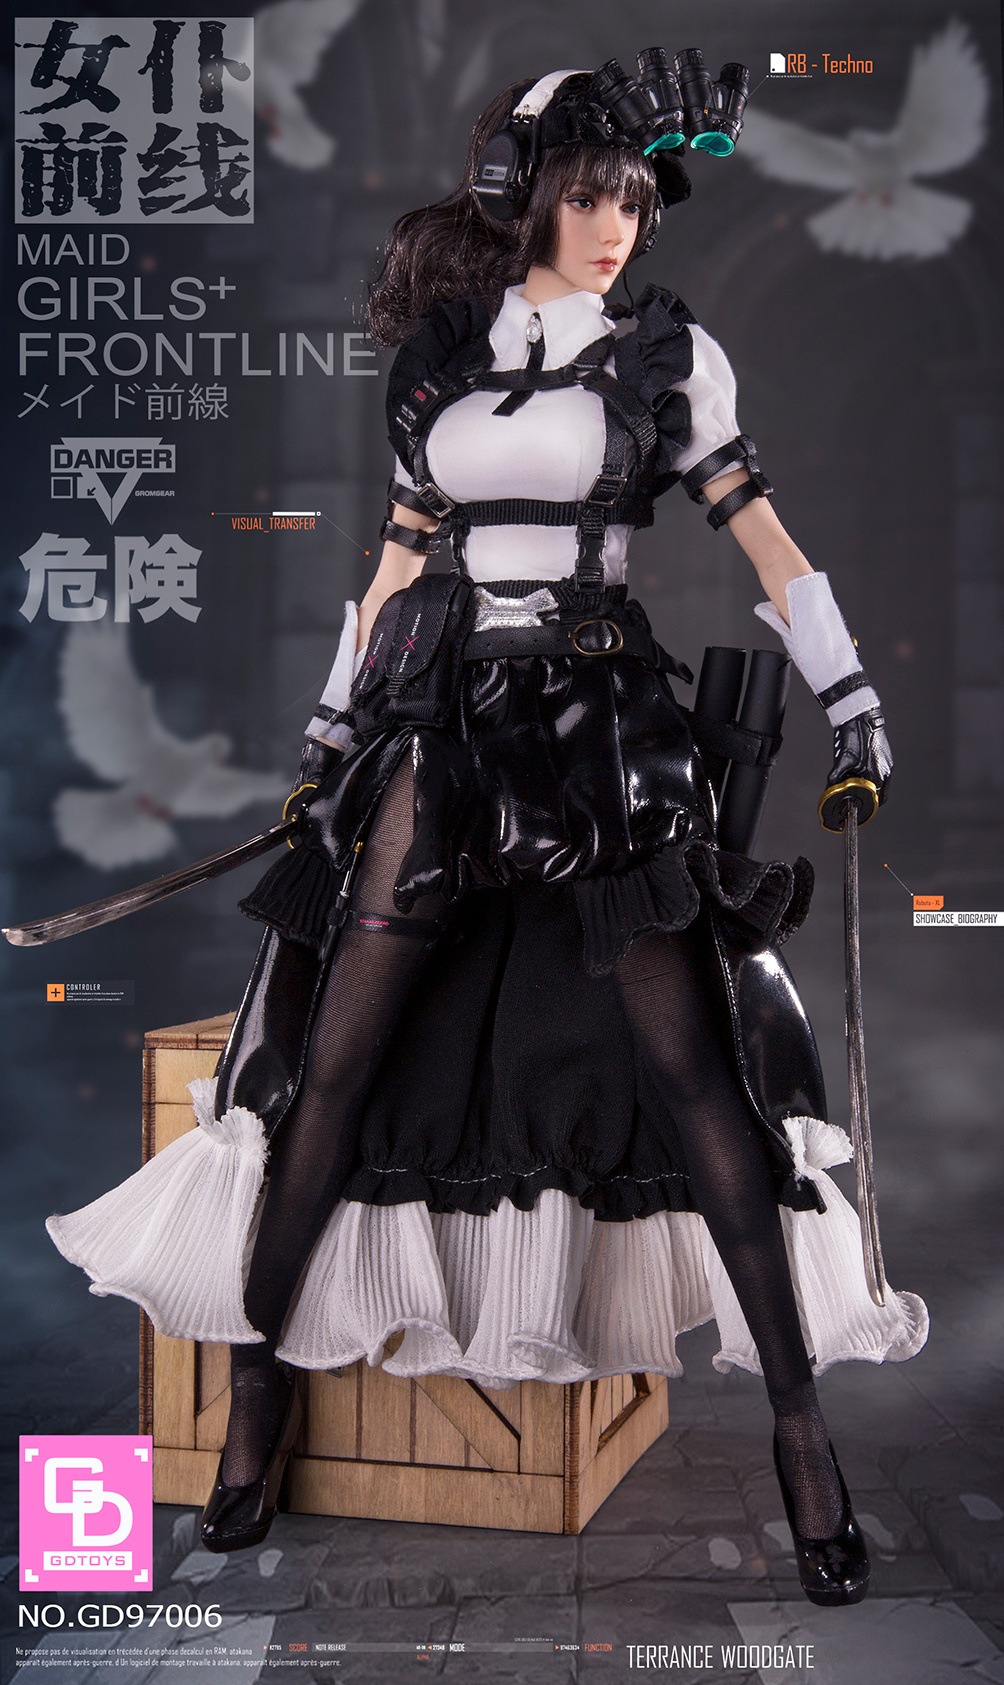 NEW PRODUCT: GDTOYS: GD97006 1/6 Scale Maid Girls+ Frontline - YULIA 22563910